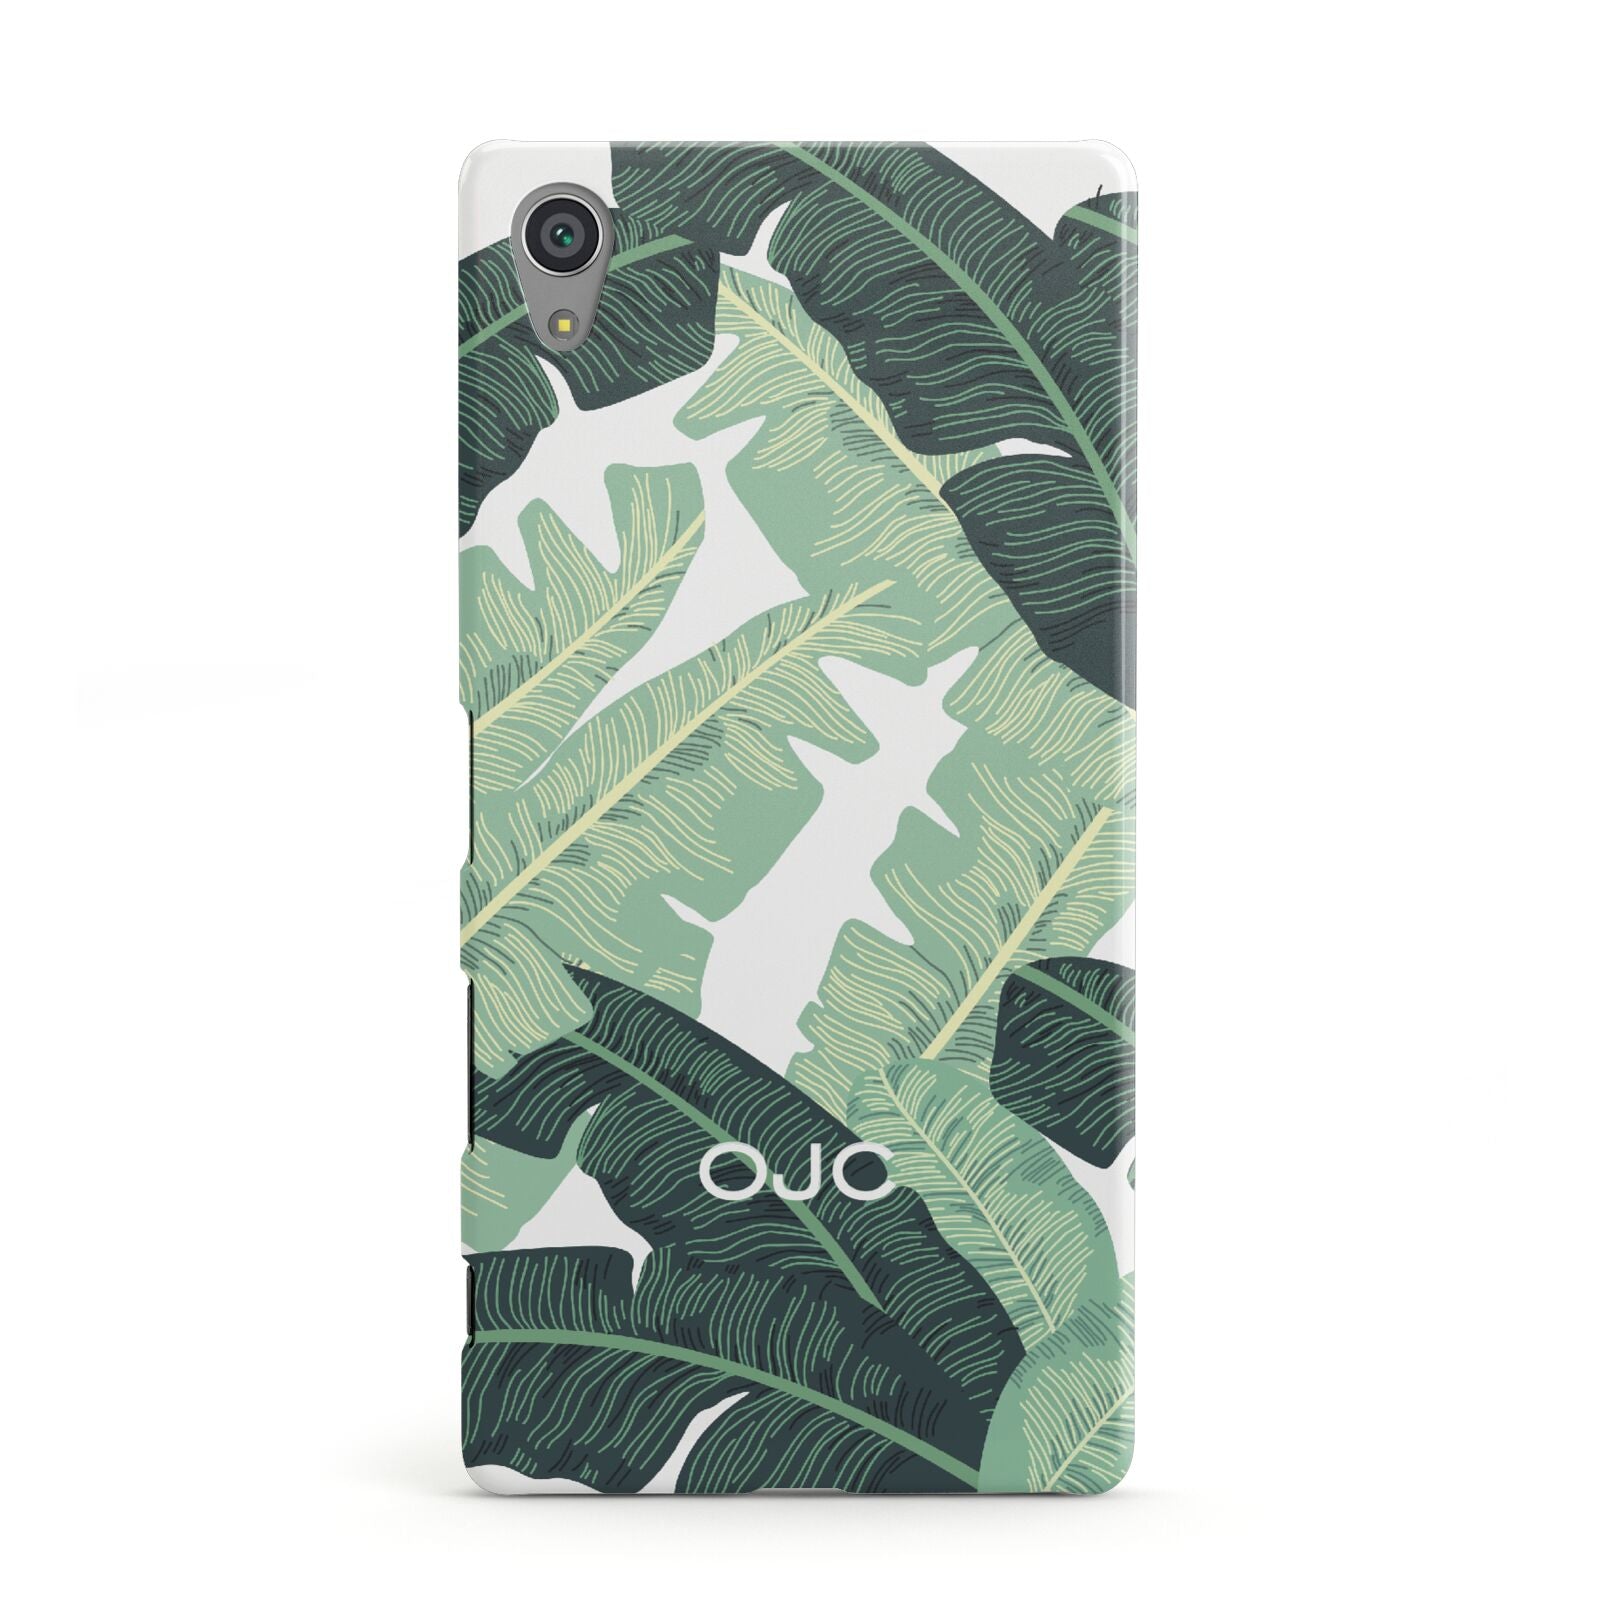 Personalised Banana Leaves Sony Xperia Case